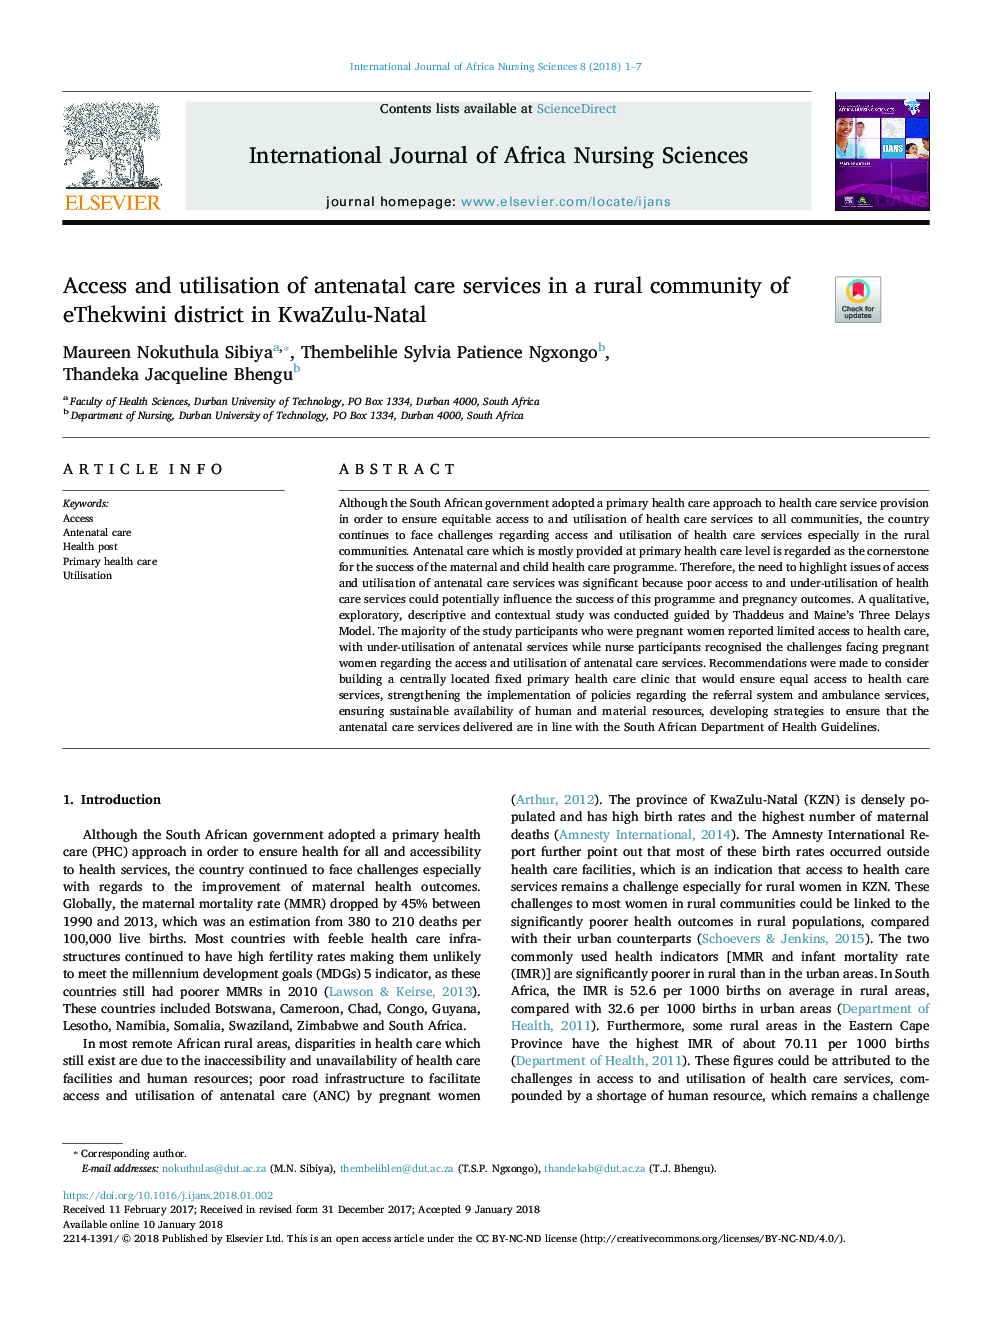 Access and utilisation of antenatal care services in a rural community of eThekwini district in KwaZulu-Natal